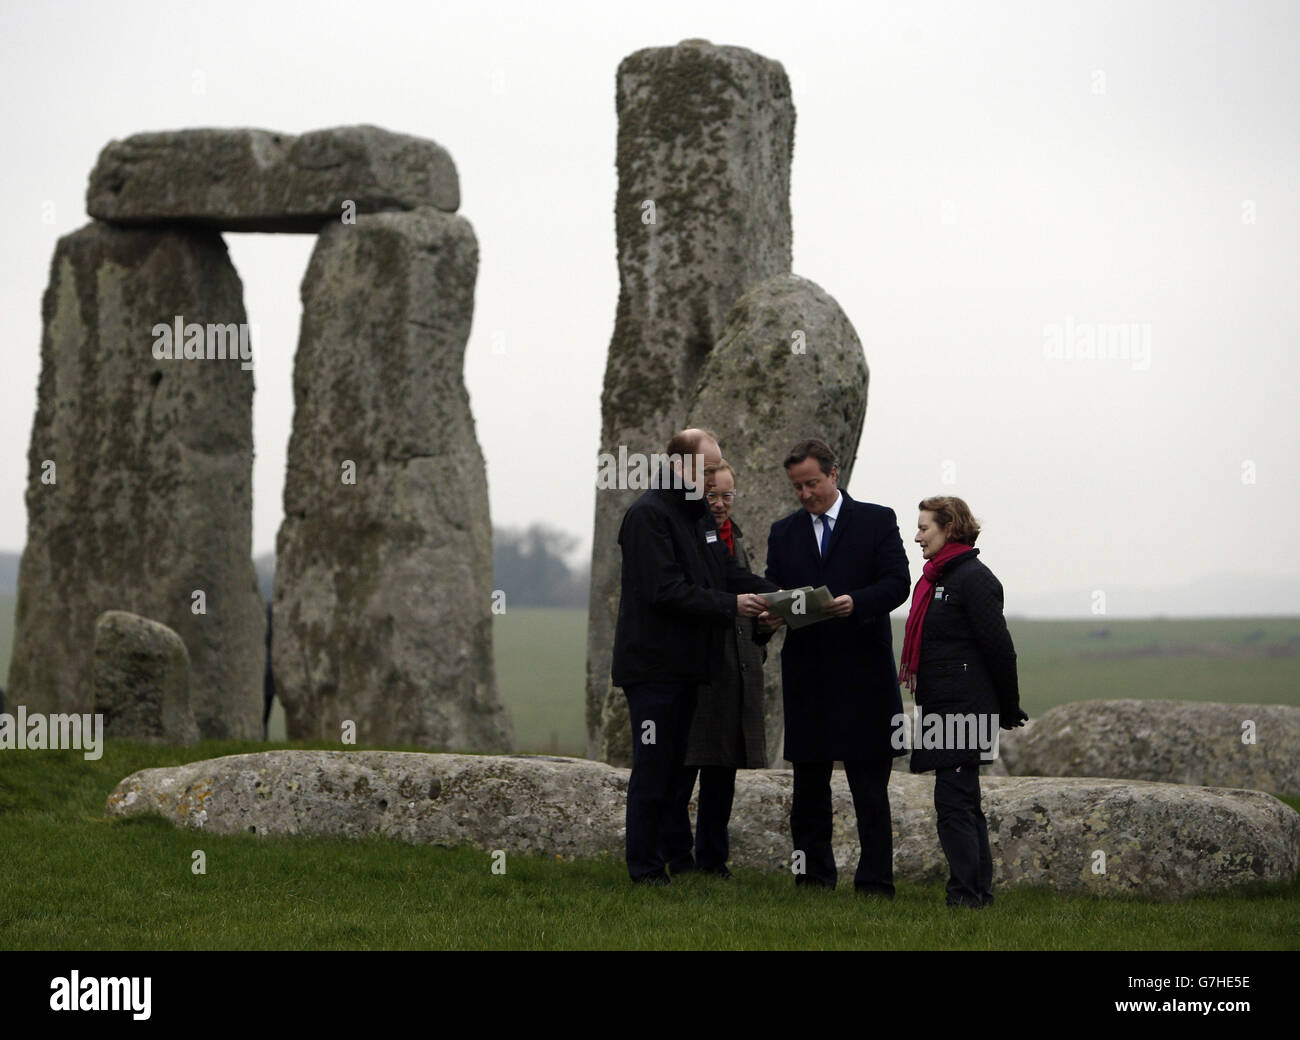 Prime Minister David Cameron (centre) talks with (left to right) Andrew Page-Dove, regional director for the Highways Agency, Simon Thurley, Director for English Heritage and Dame Helen Ghosh, Director General of the National Trust, during a visit to Stonehenge in Wiltshire, as the Government announced today a &pound;15bm investment into Britian's roads. Stock Photo